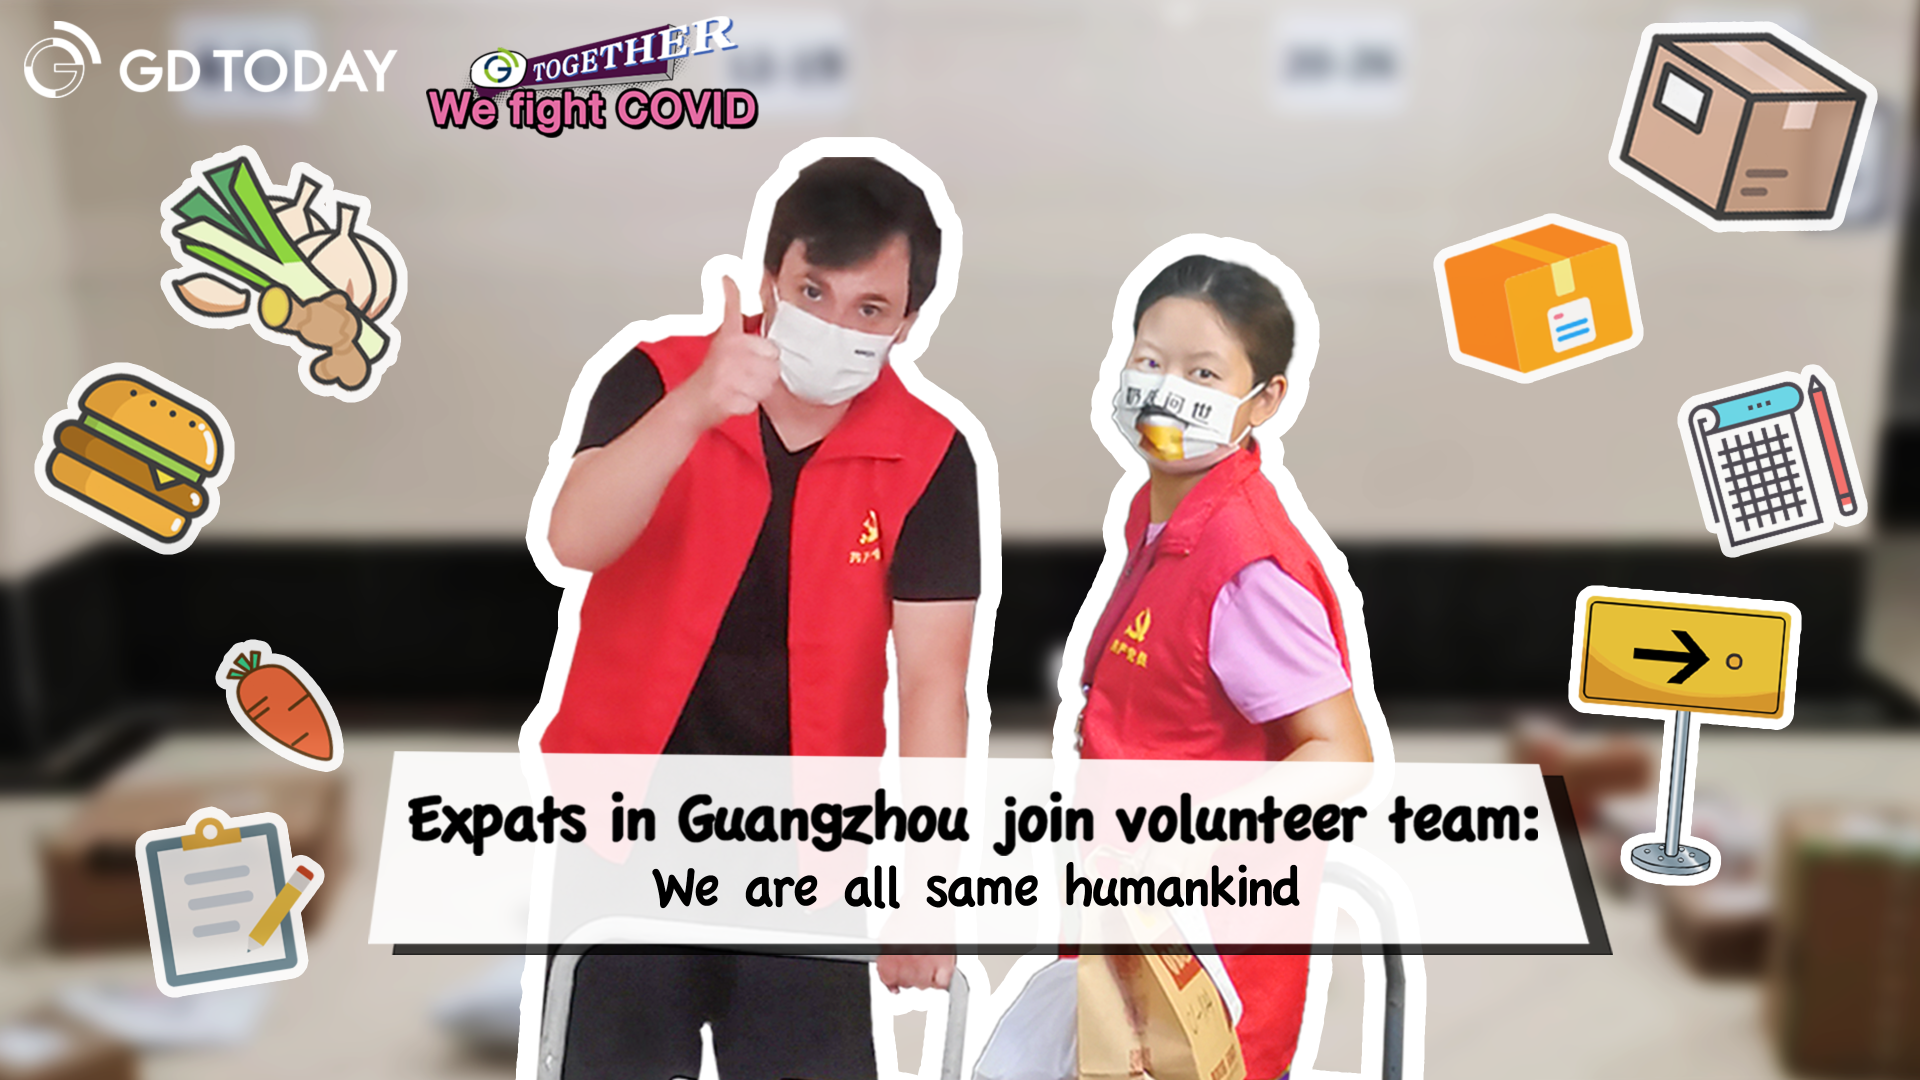 Expats in Guangzhou join volunteer team: We are all same humankind